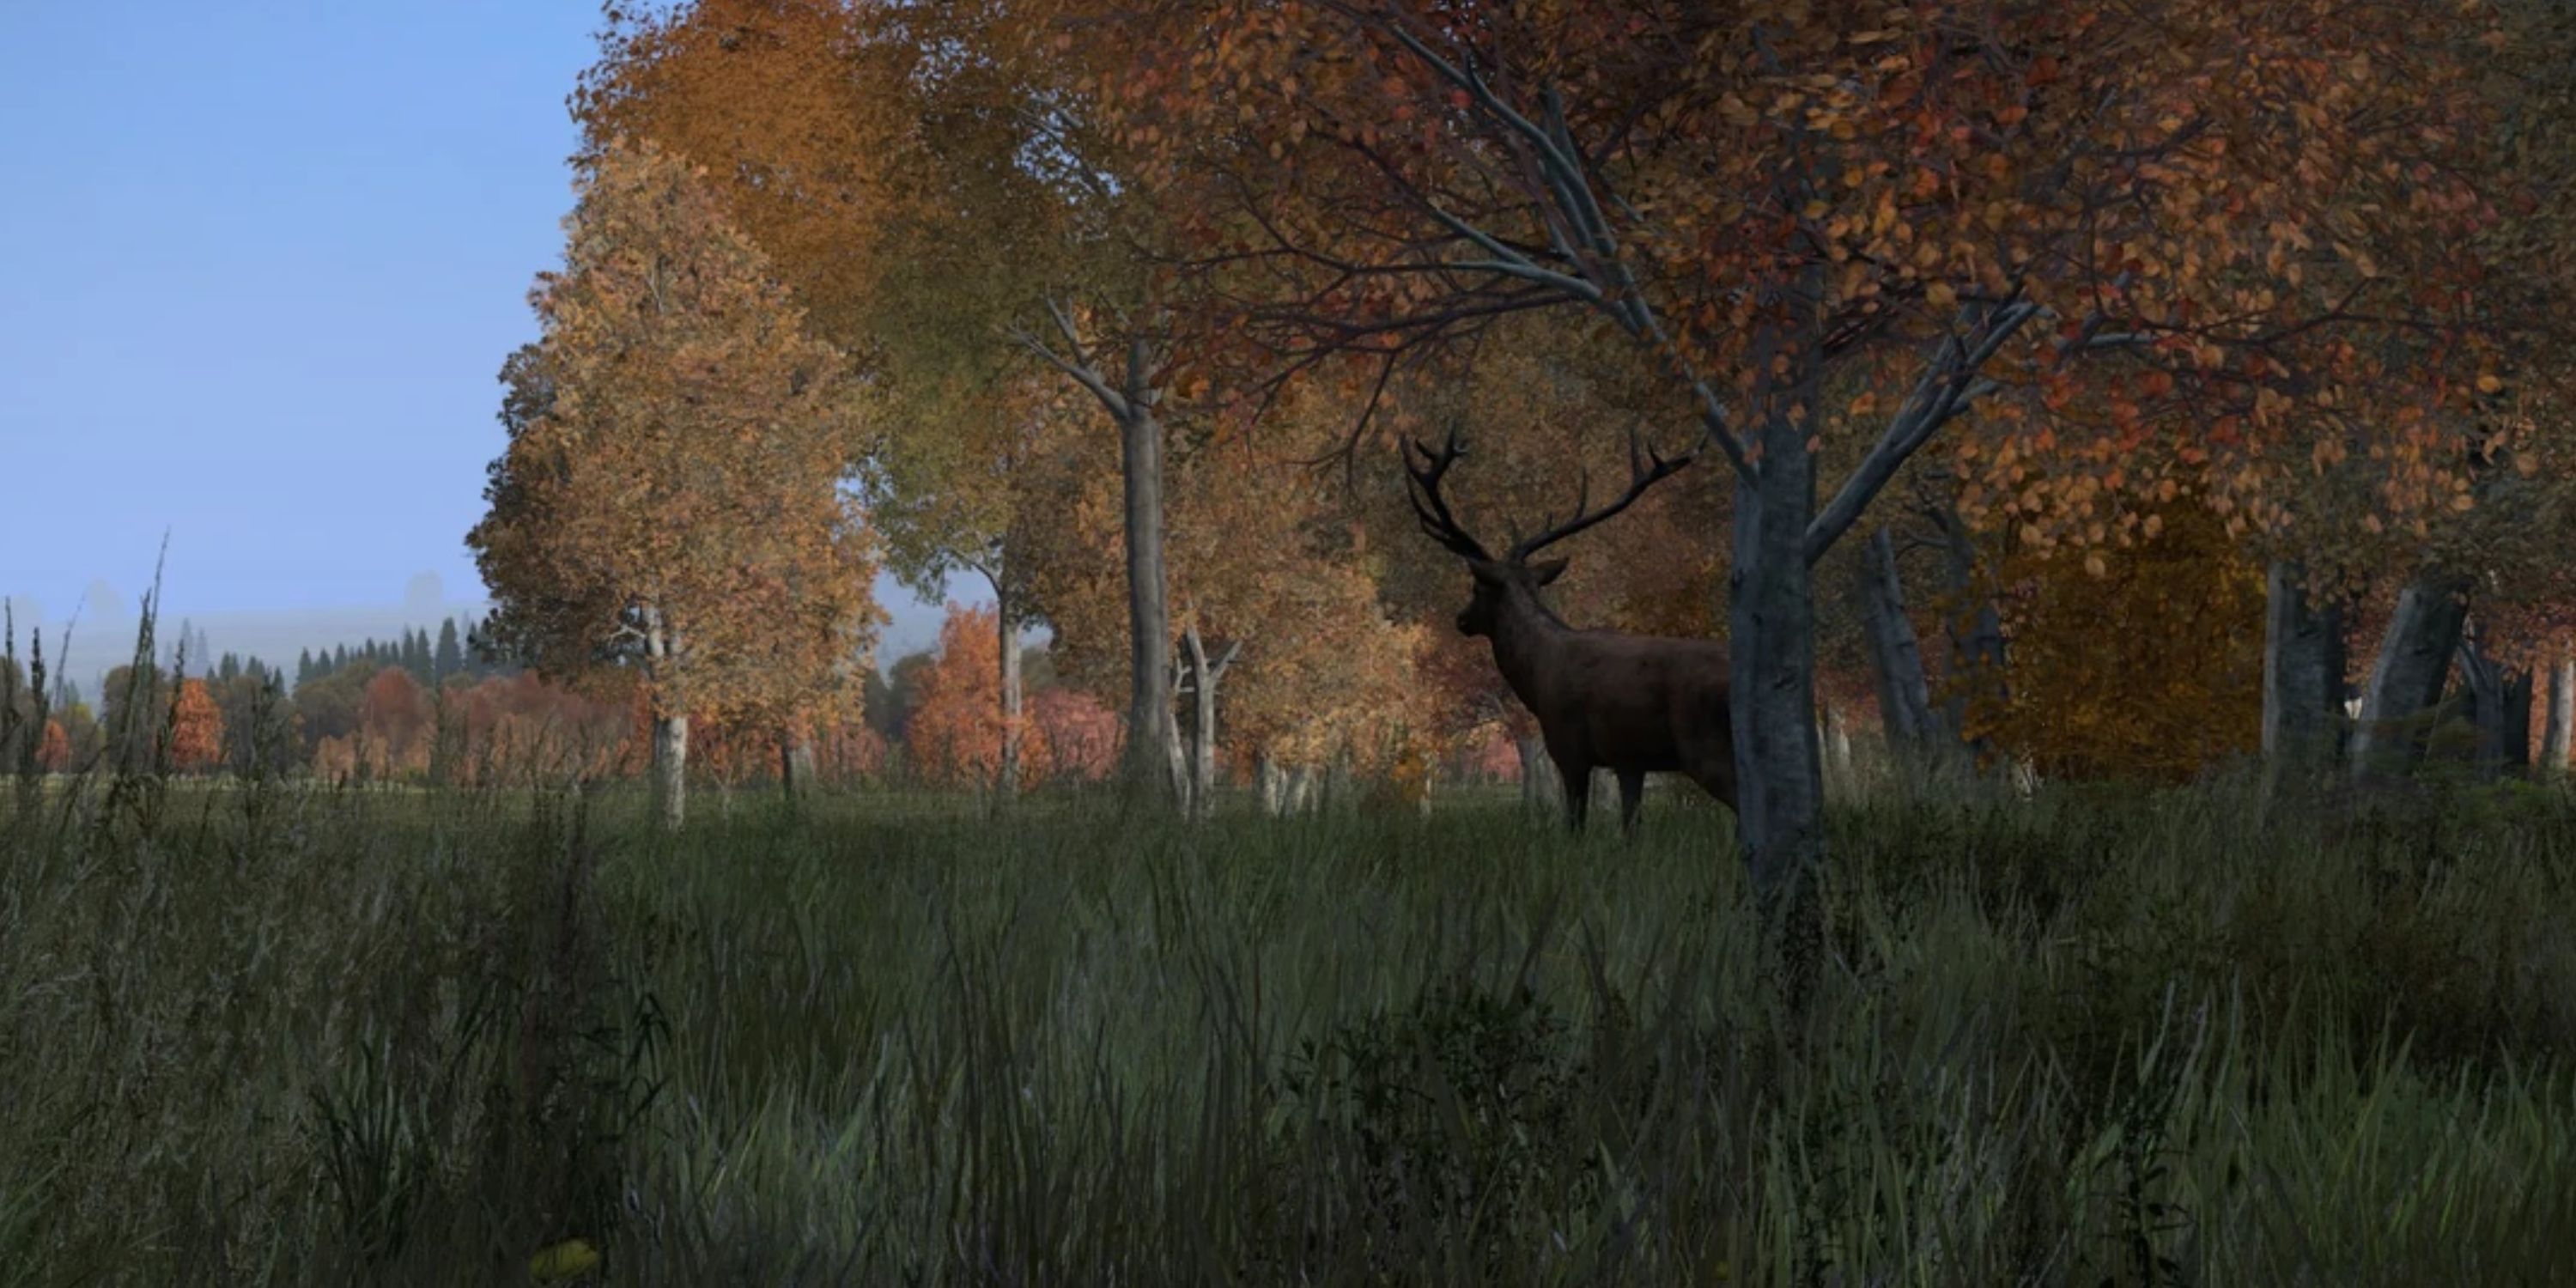 hunting deer in the woods in dayz